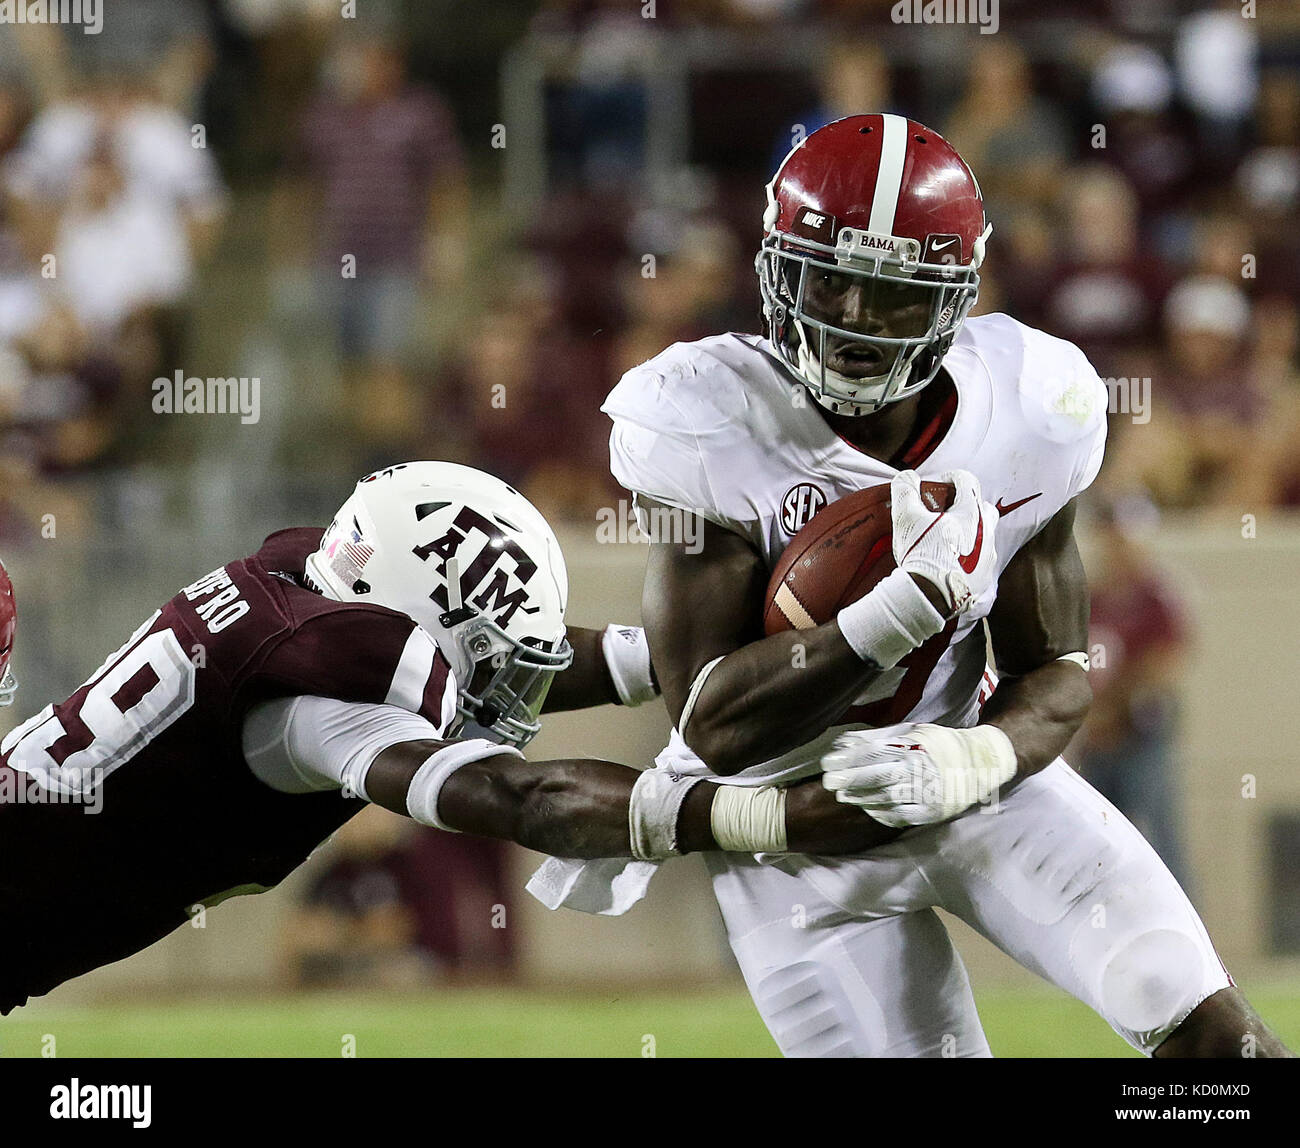 October 6, 2017: Alabama Crimson Tide running back Bo Scarbrough (9) during the NCAA football game between the Alabama Crimson Tide and the Texas A&M Aggies at Kyle Field in College Station, TX; John Glaser/CSM. Stock Photo